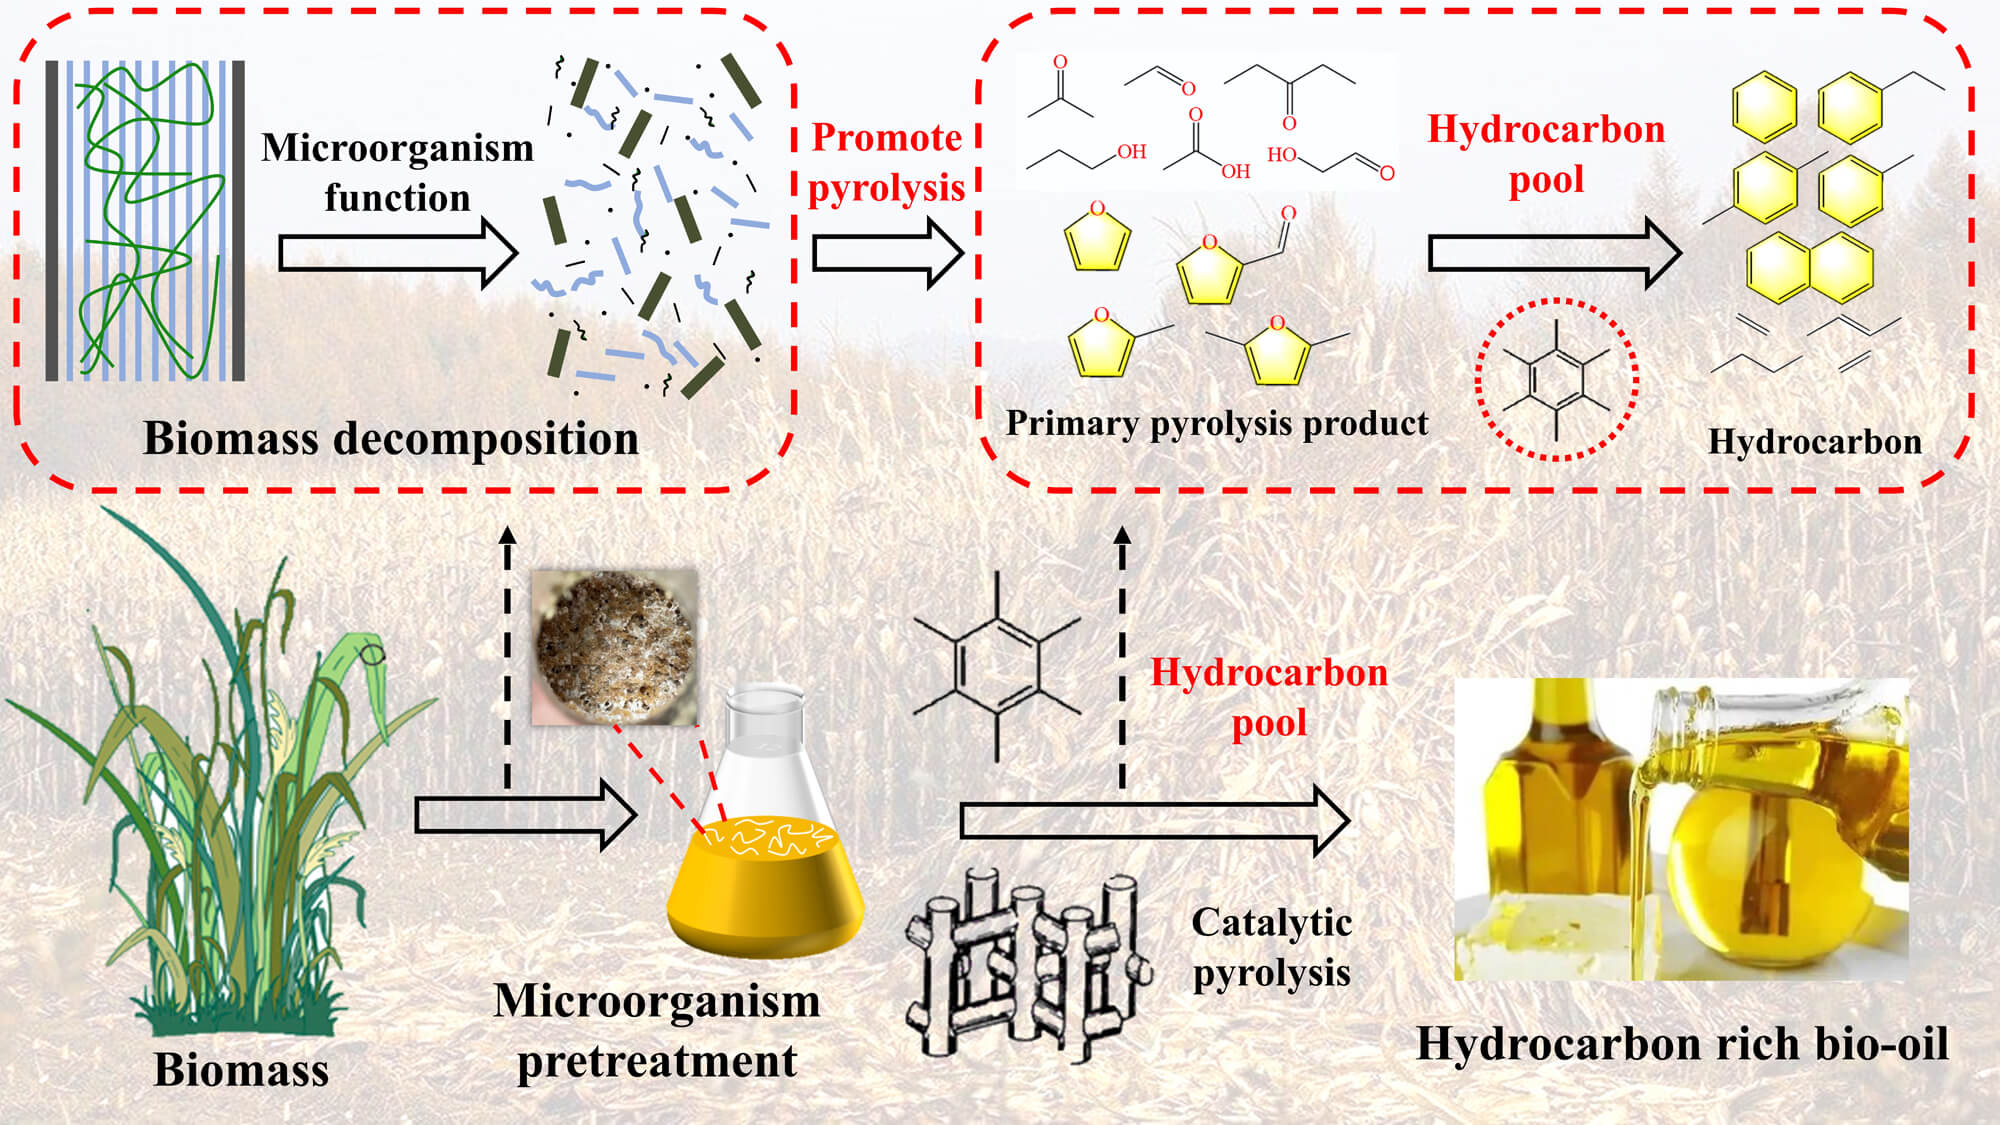 Enhancing Hydrocarbon-Rich Bio-Oil Production via Catalytic Pyrolysis Fortified with Microorganism Pretreatment